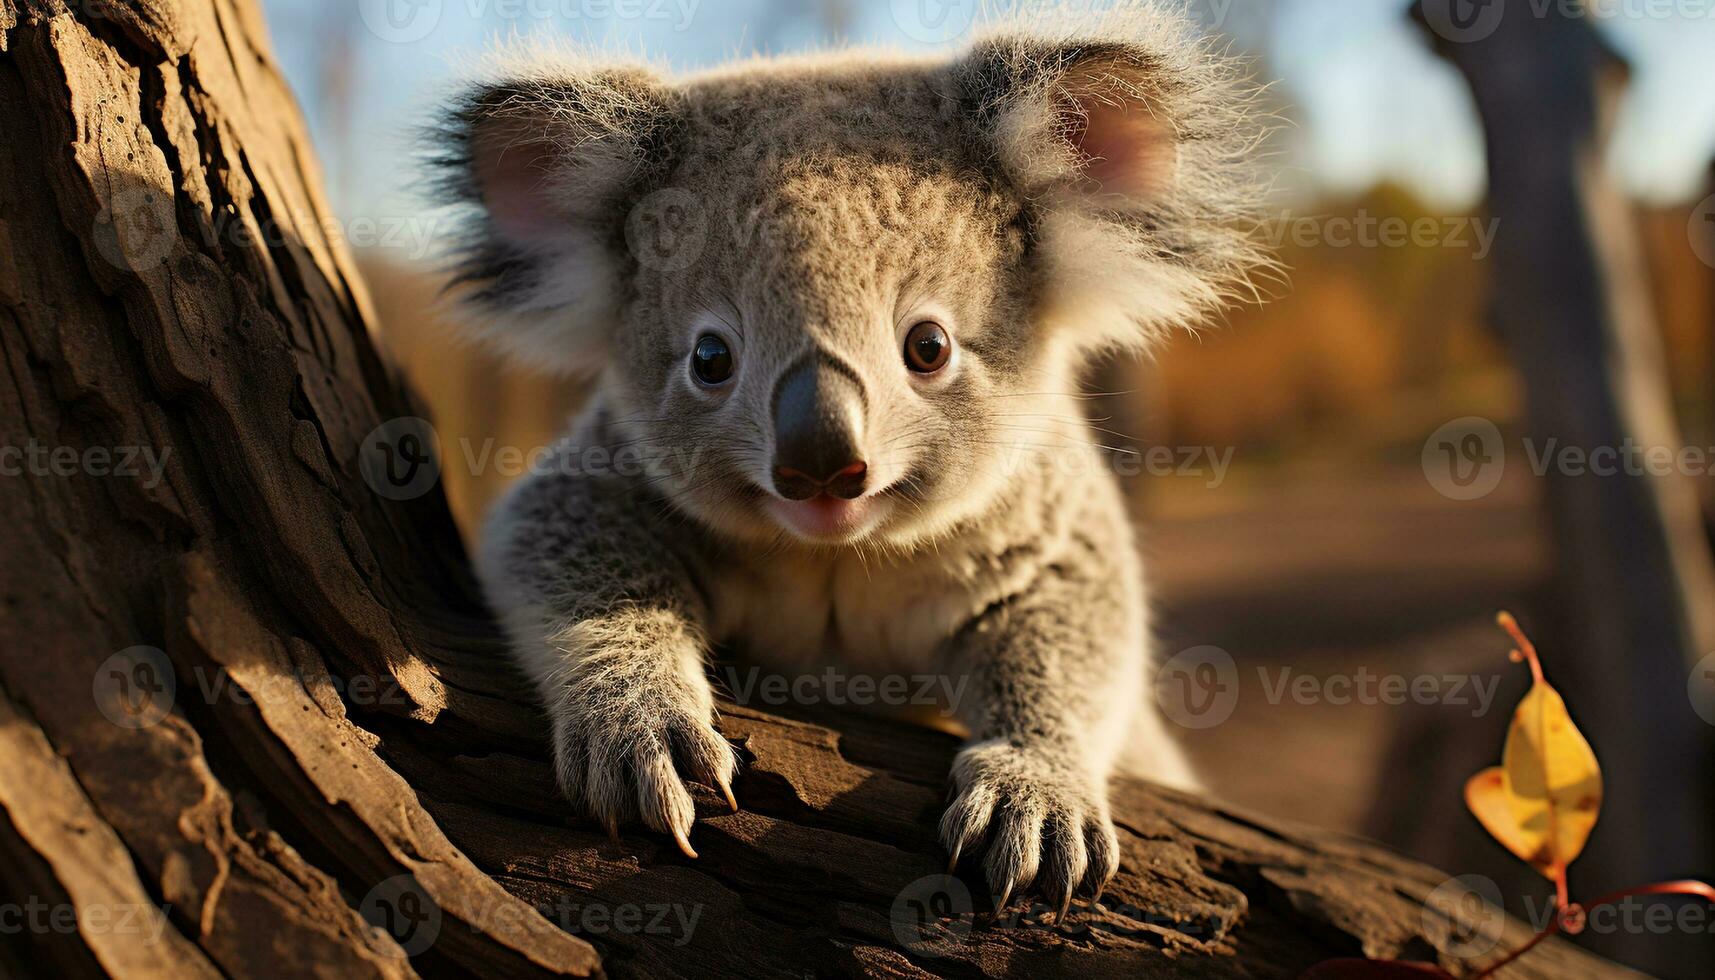 Cute koala sitting on a branch, looking at the camera generated by AI photo